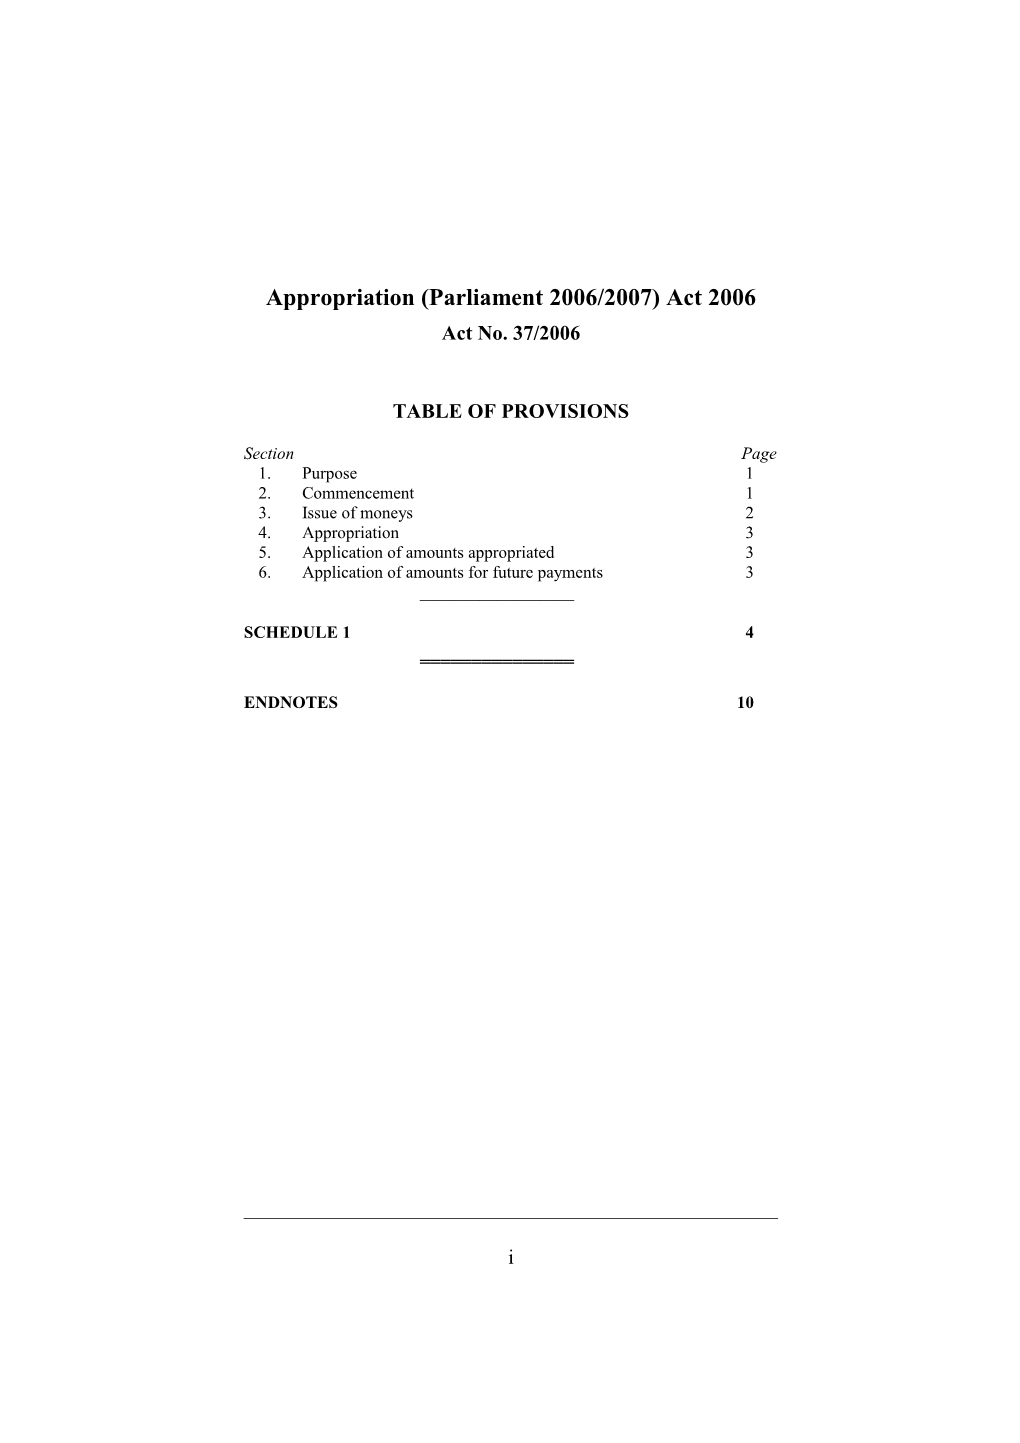 Appropriation (Parliament 2006/2007) Act 2006